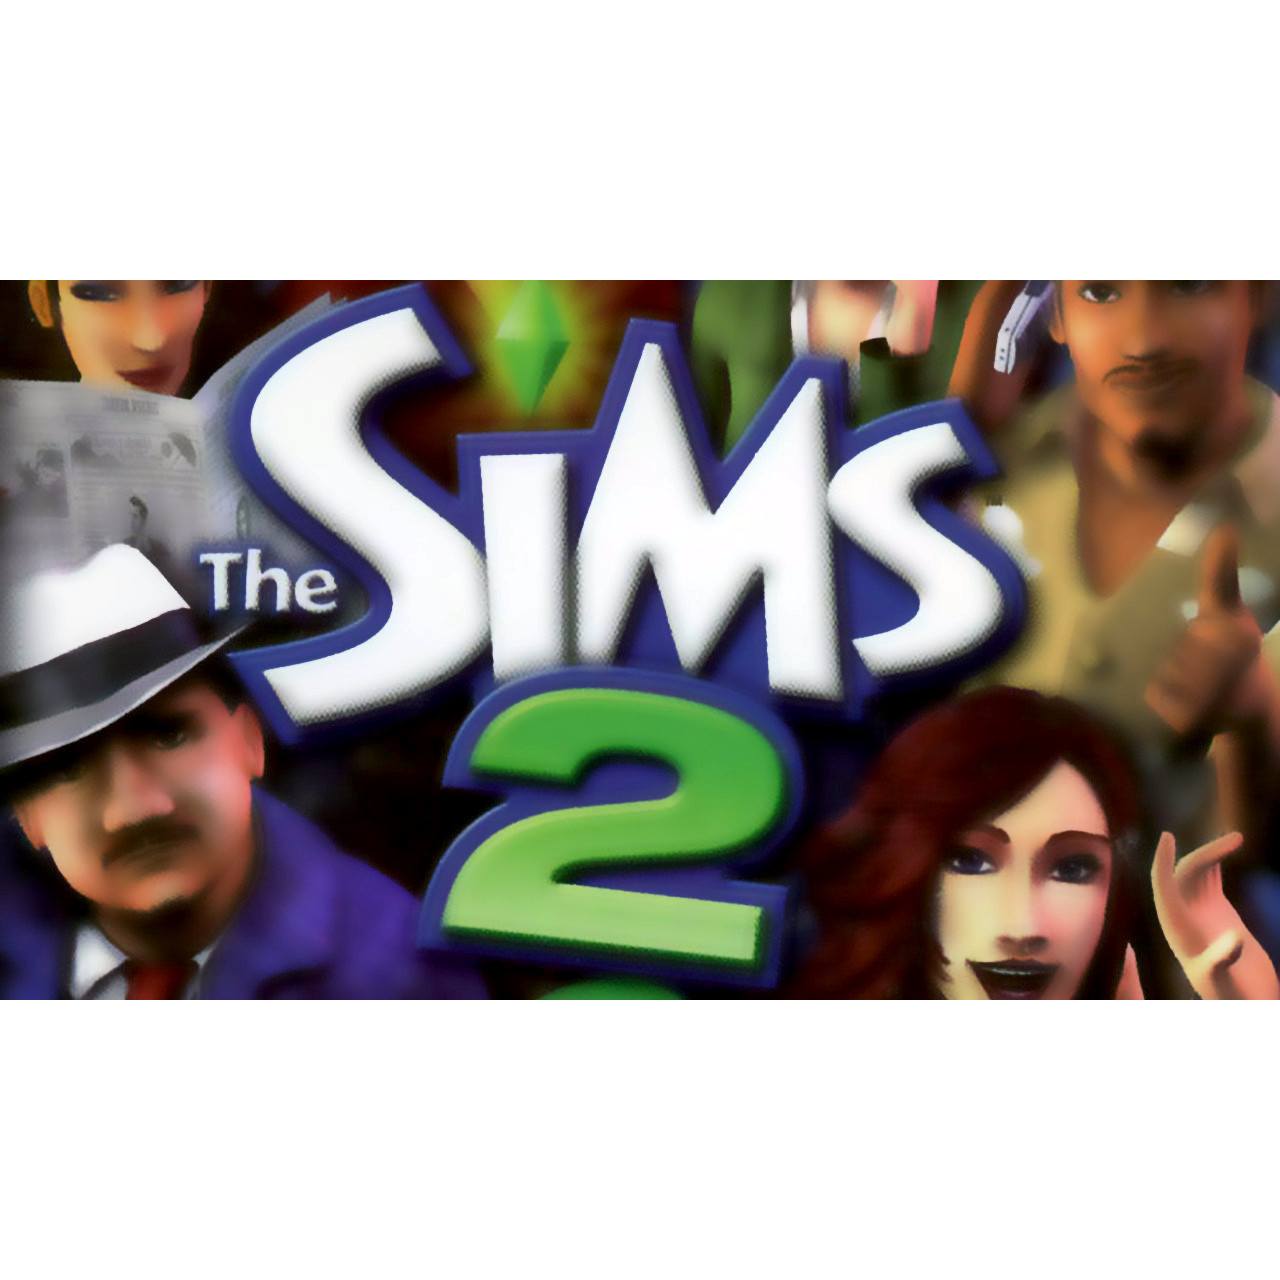 The Sims 2 Cheats For PC PlayStation 2 Game Boy Advance PSP Xbox